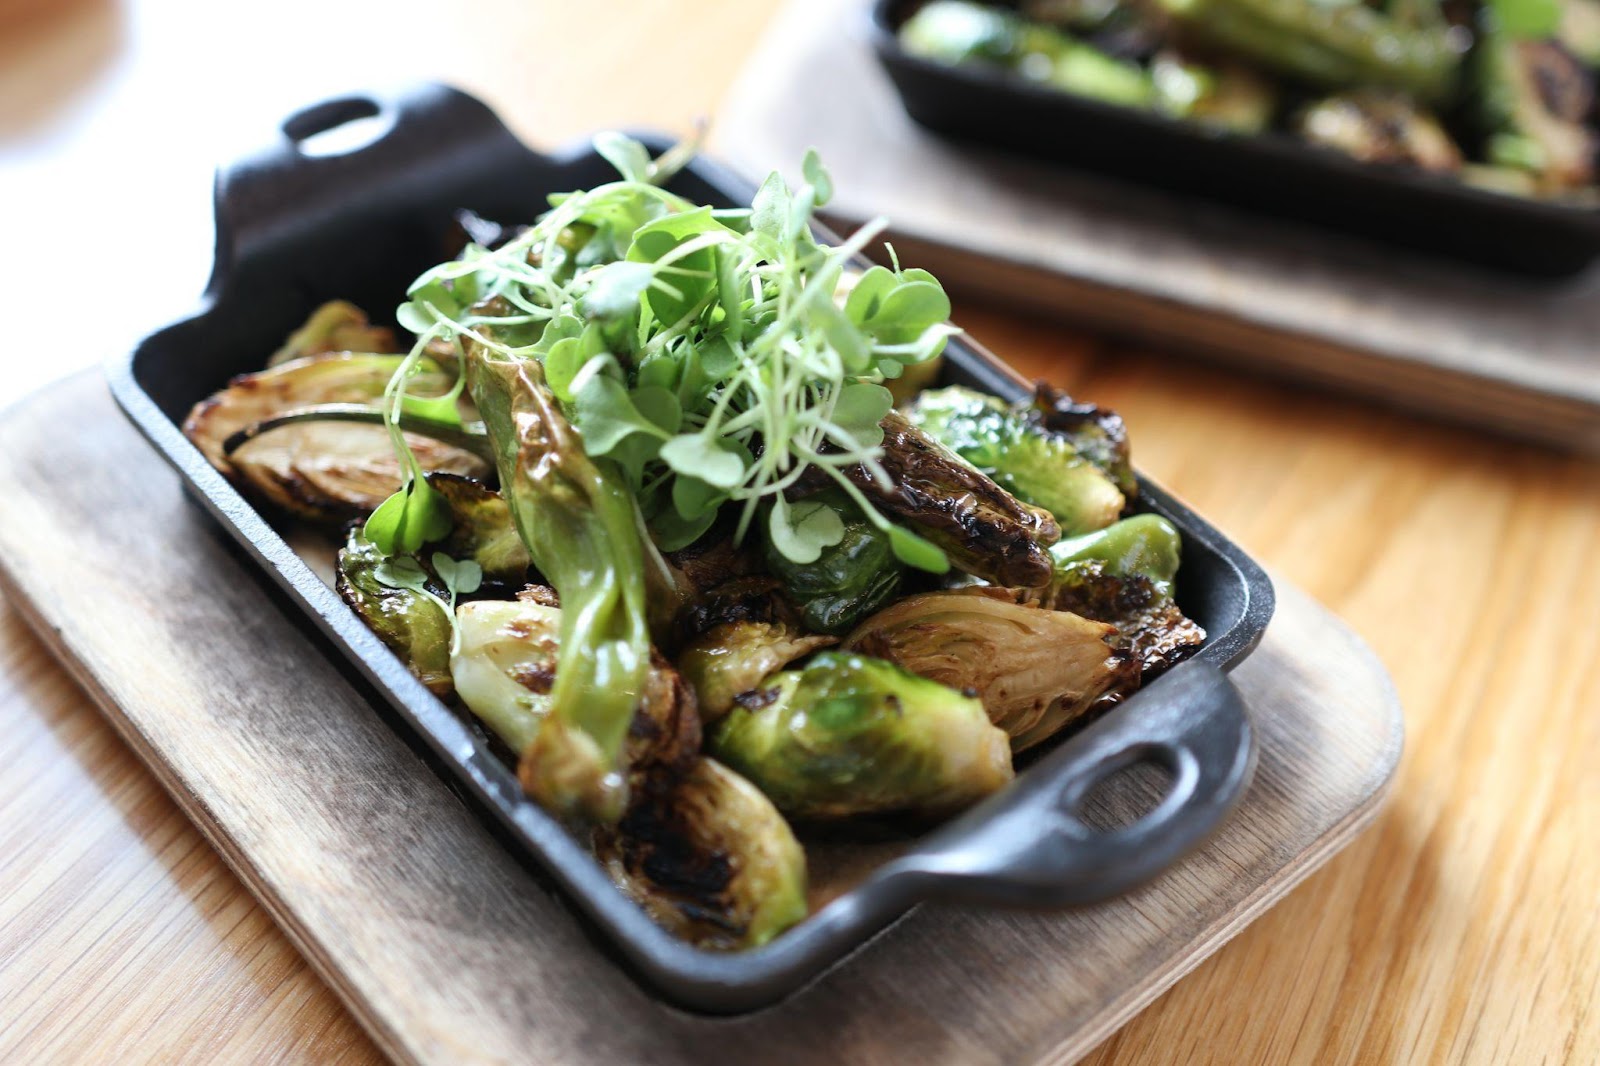 Brussel Sprouts from Bigfire